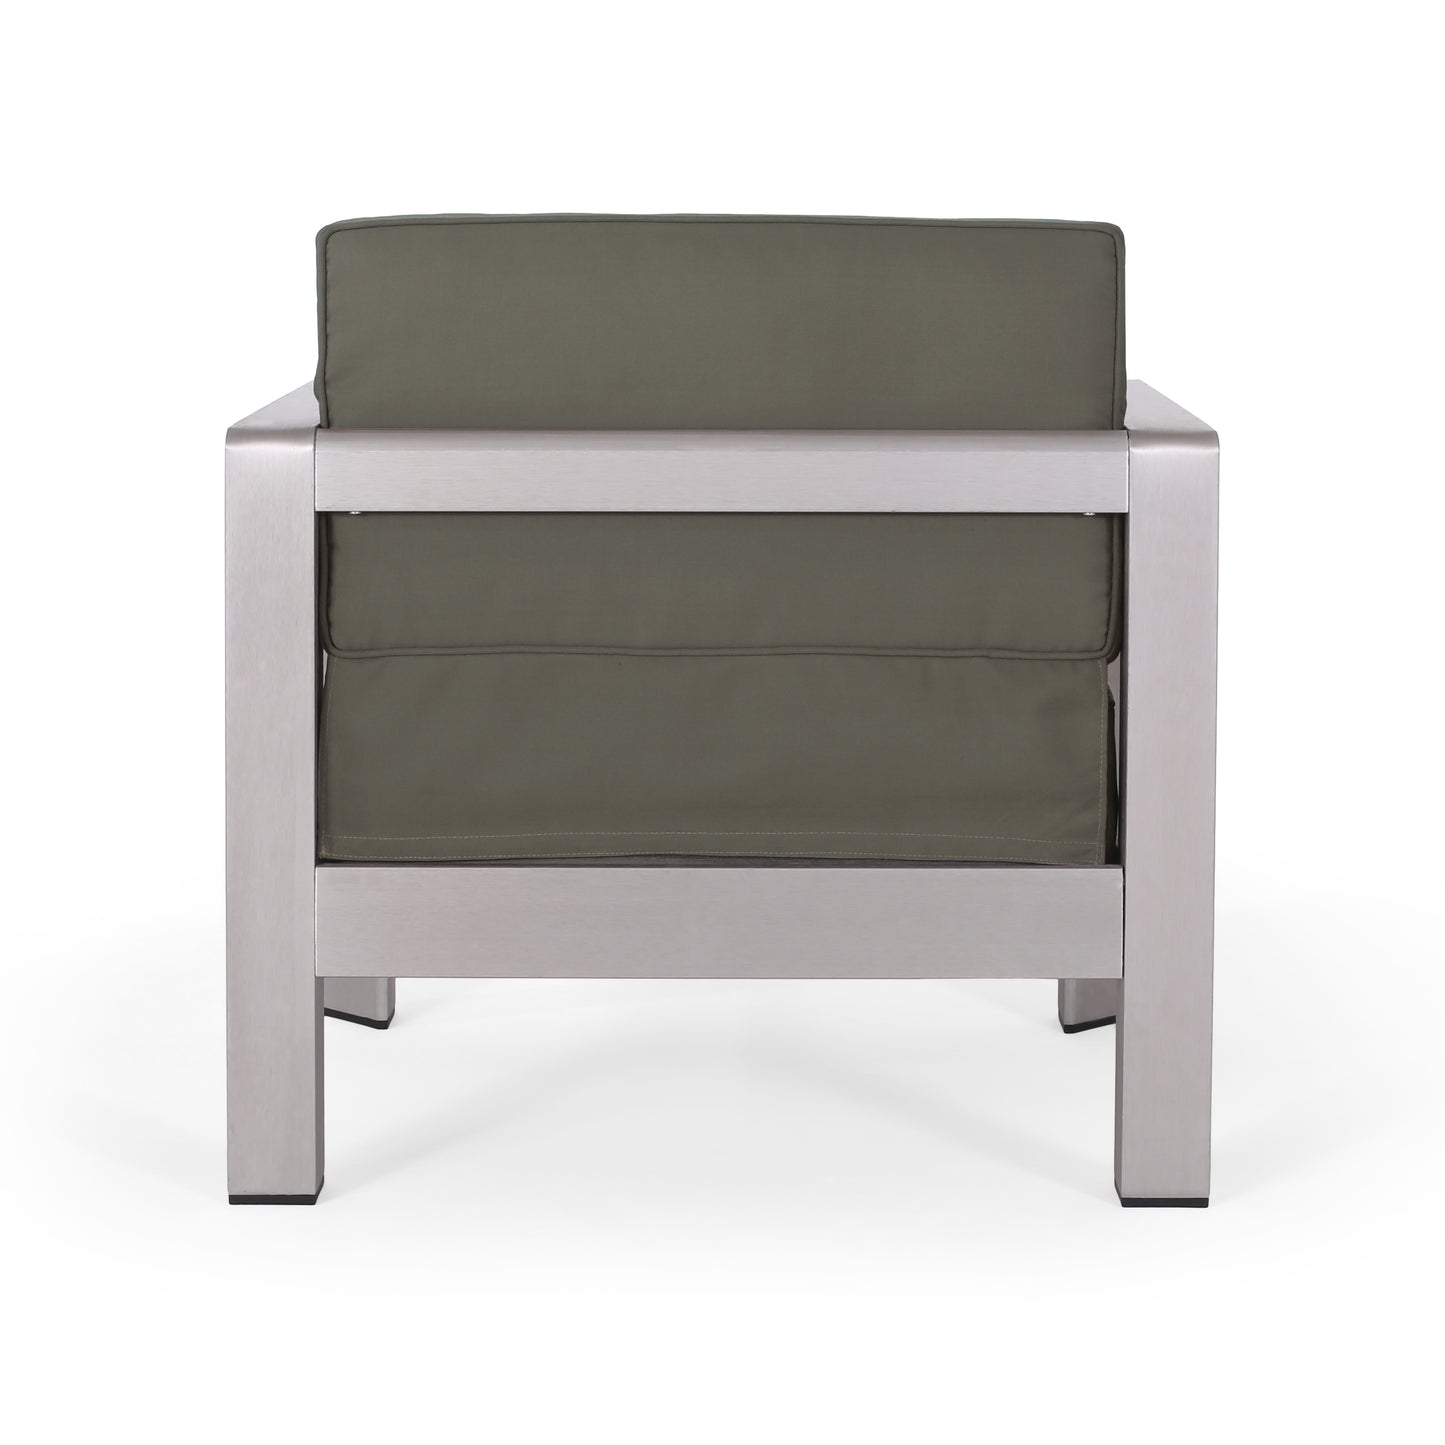 Kenny Outdoor 4-Seater Aluminum Chat Set with Fire Pit and Tank Holder